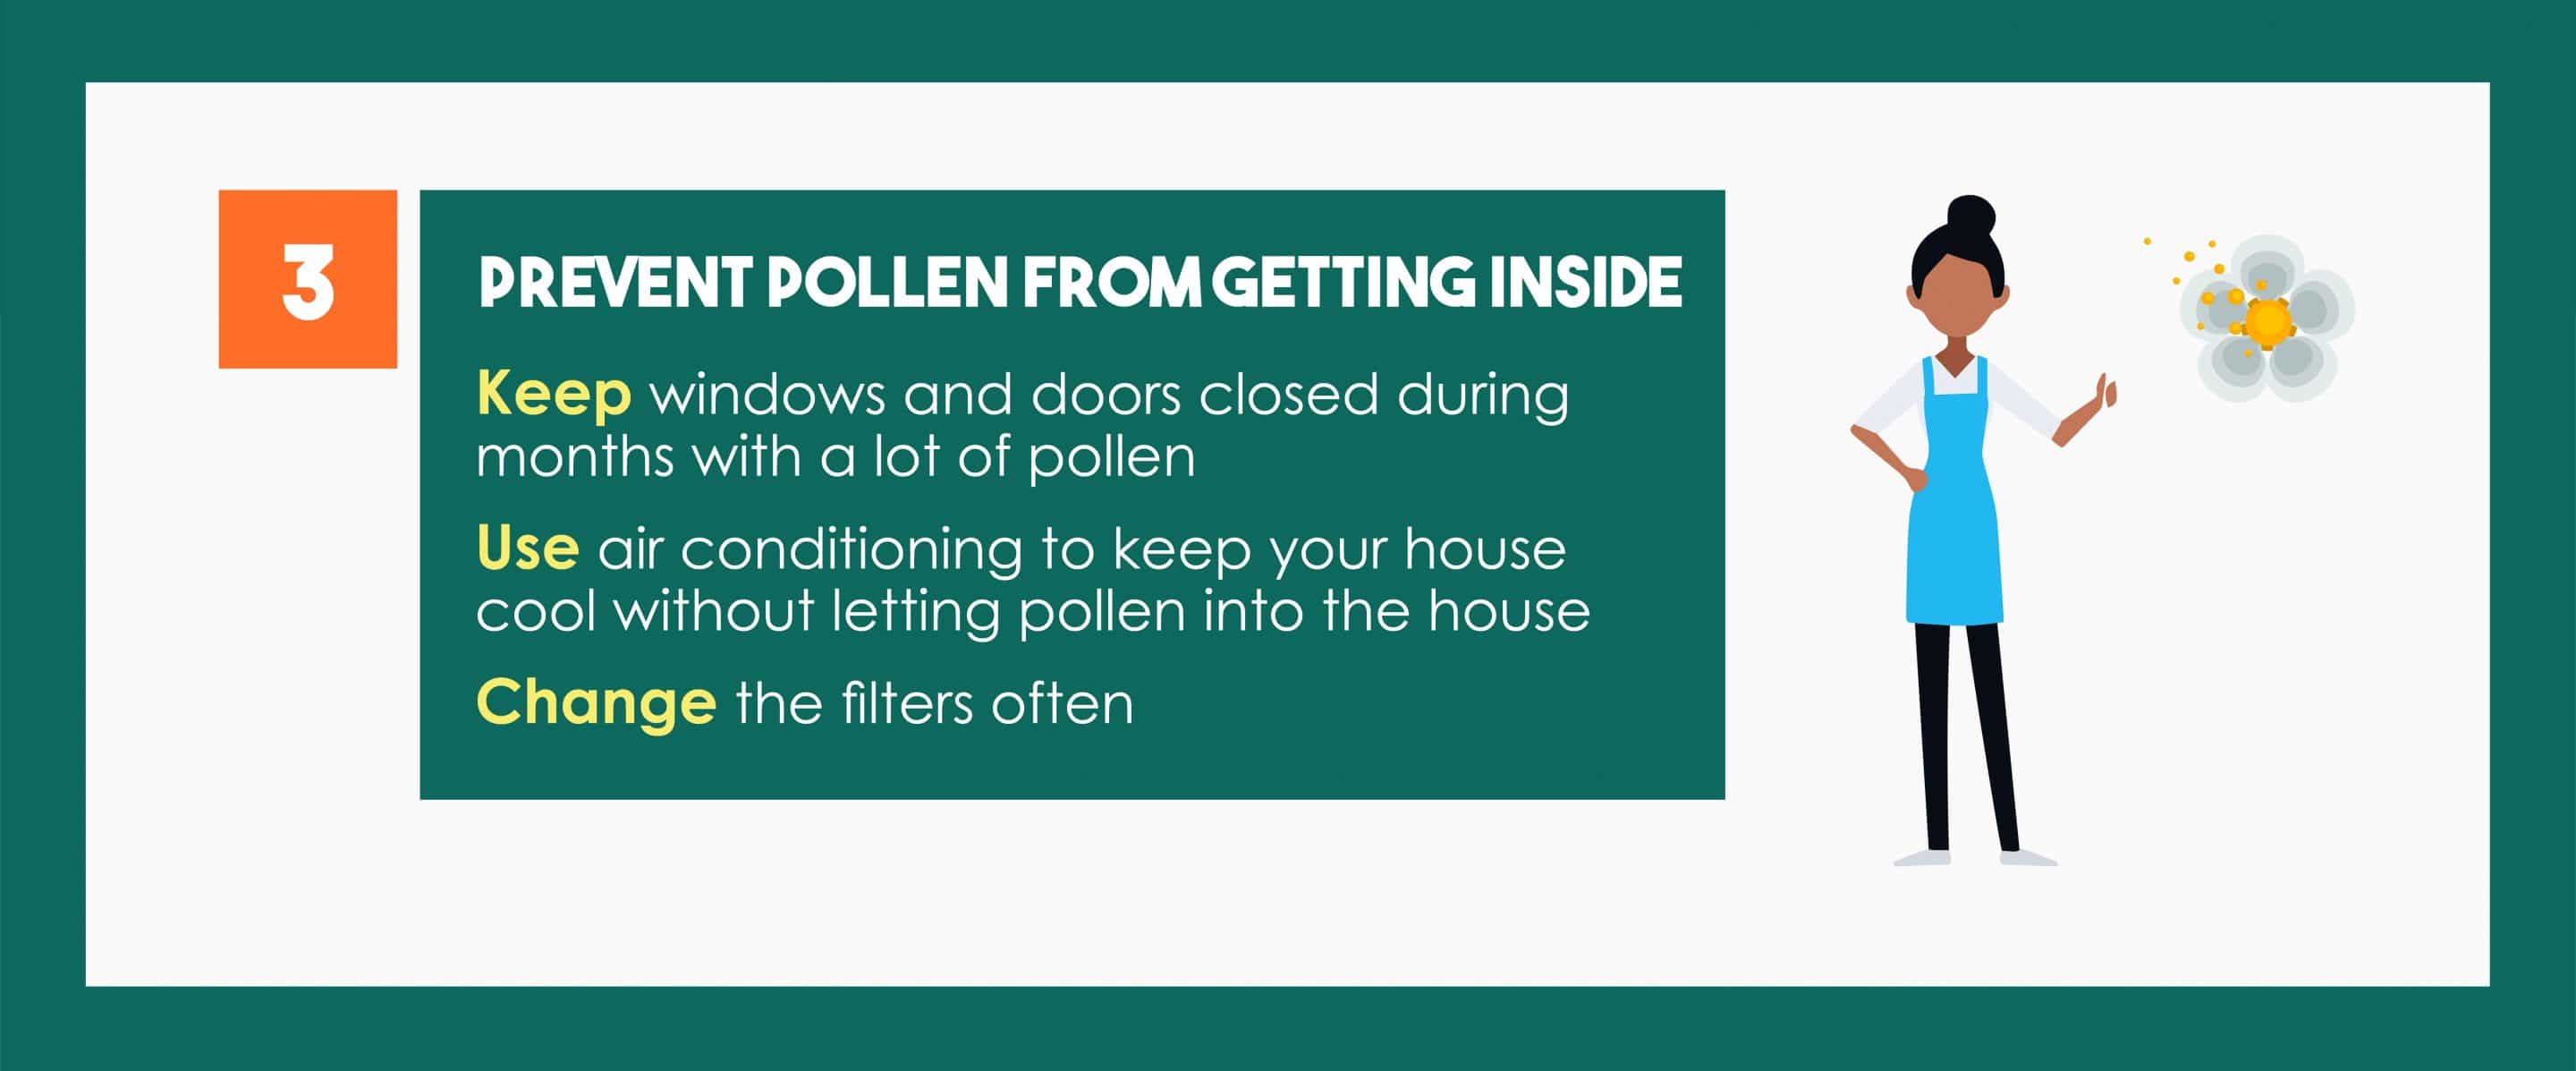 preventing pollen and allergens